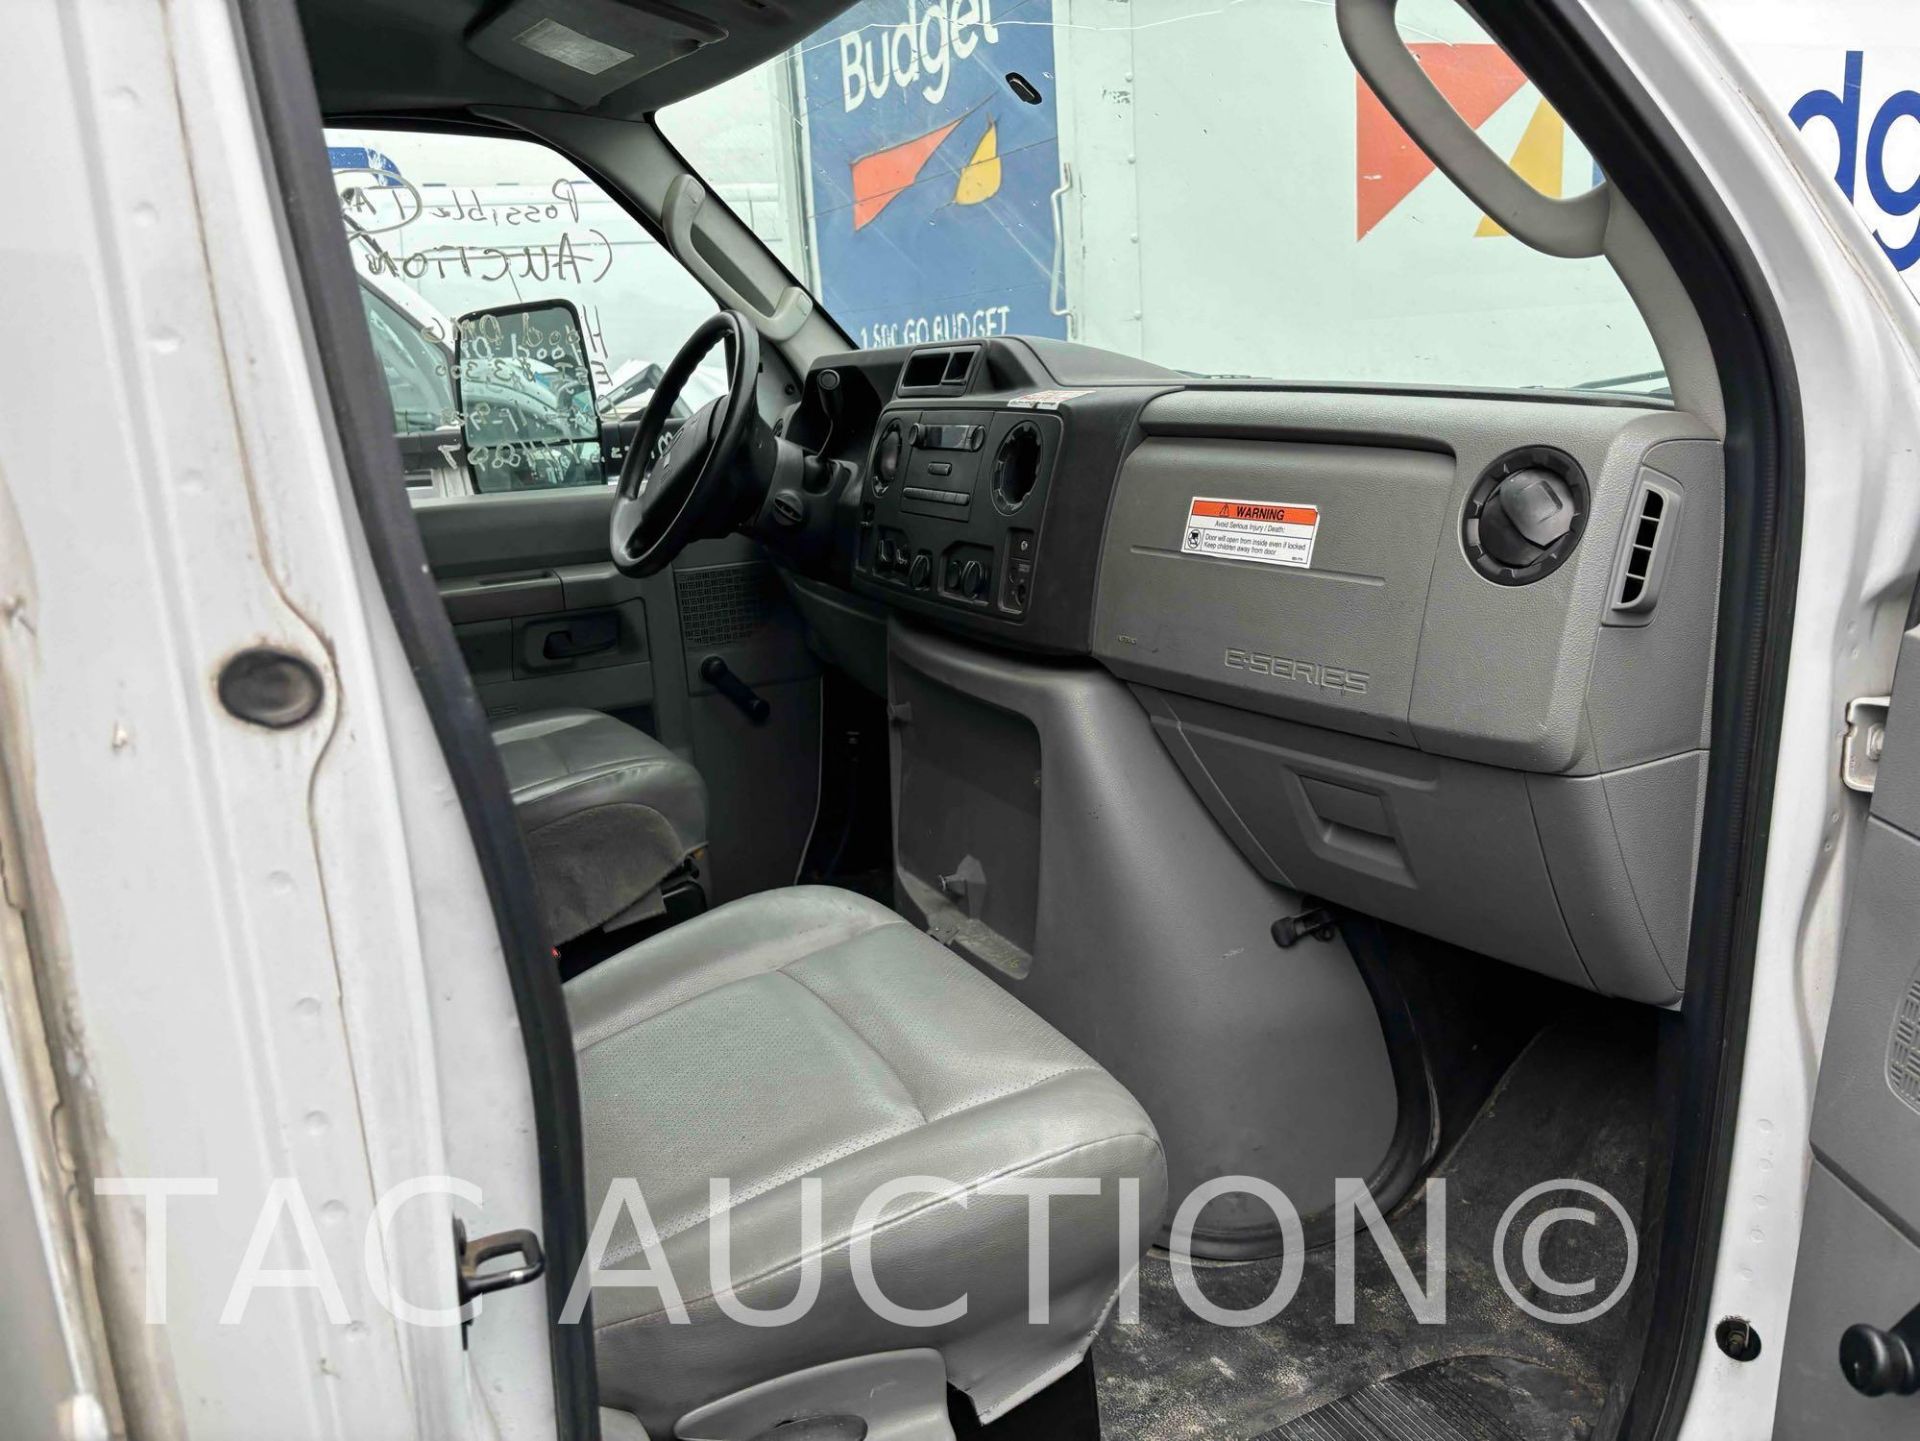 2015 Ford E-350 16ft Box Truck - Image 57 of 98